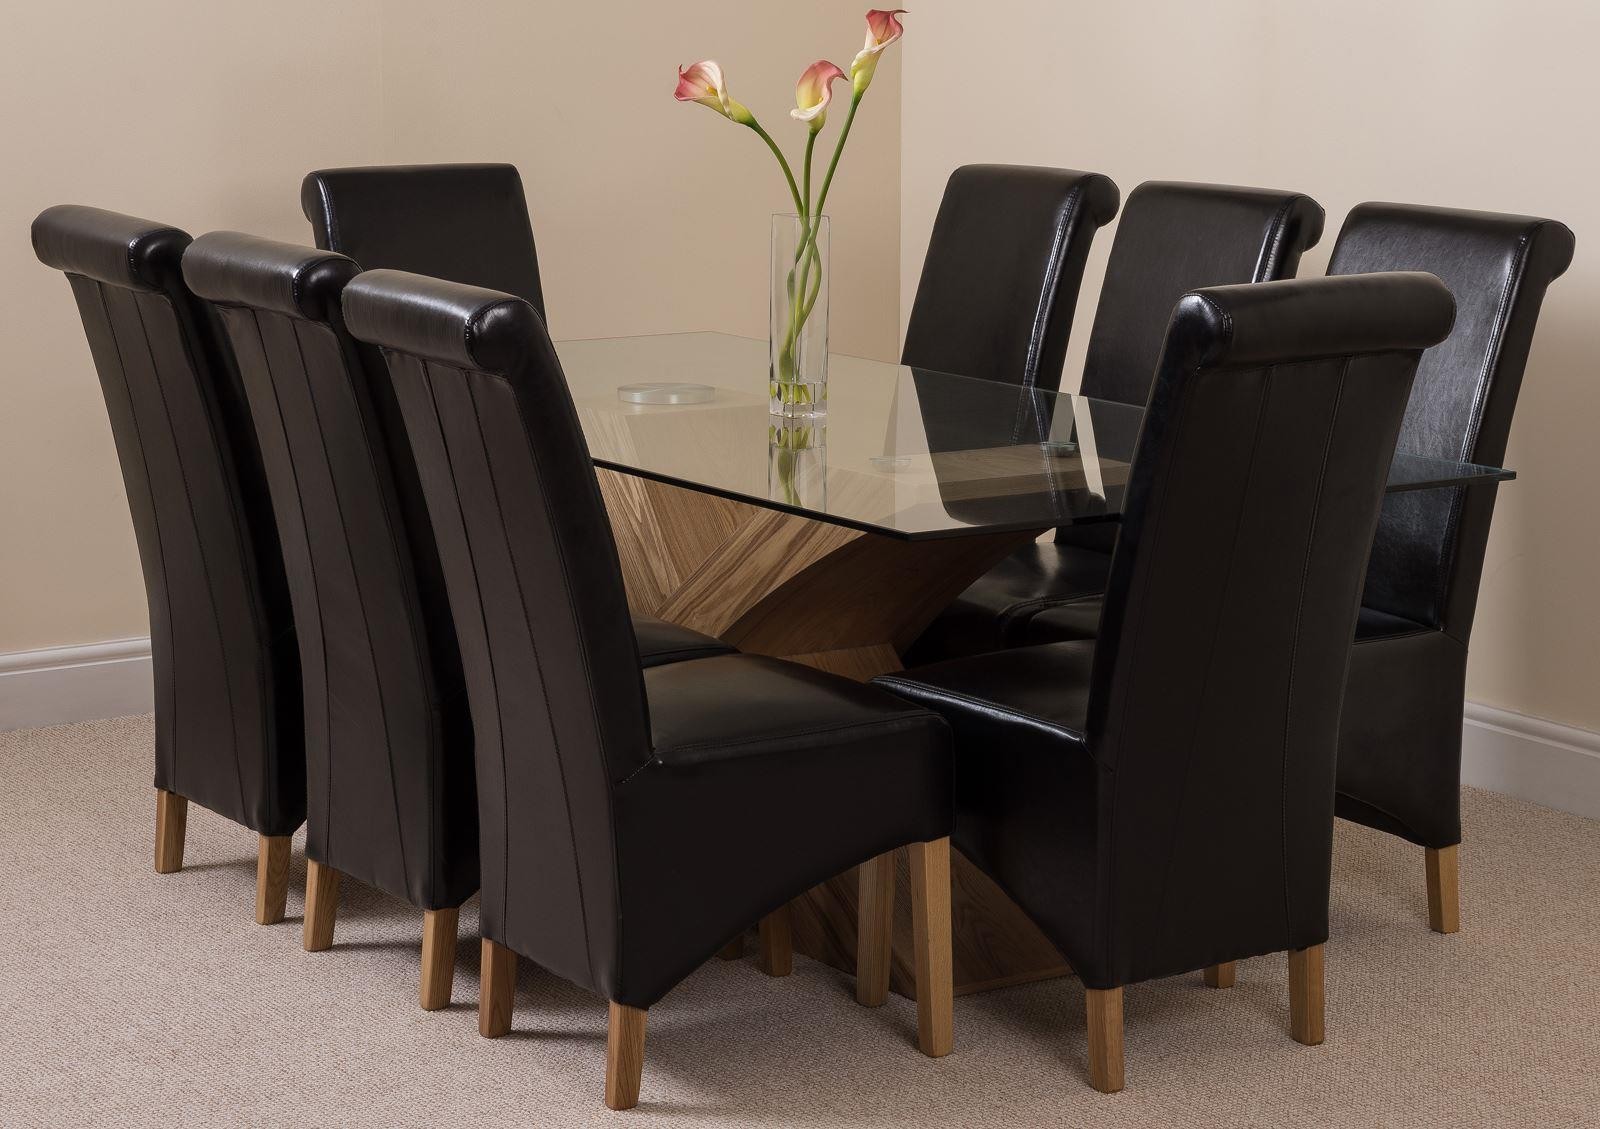 Valencia Oak 200cm Wood and Glass Dining Table with 8 Montana Dining Chairs [Black Leather]